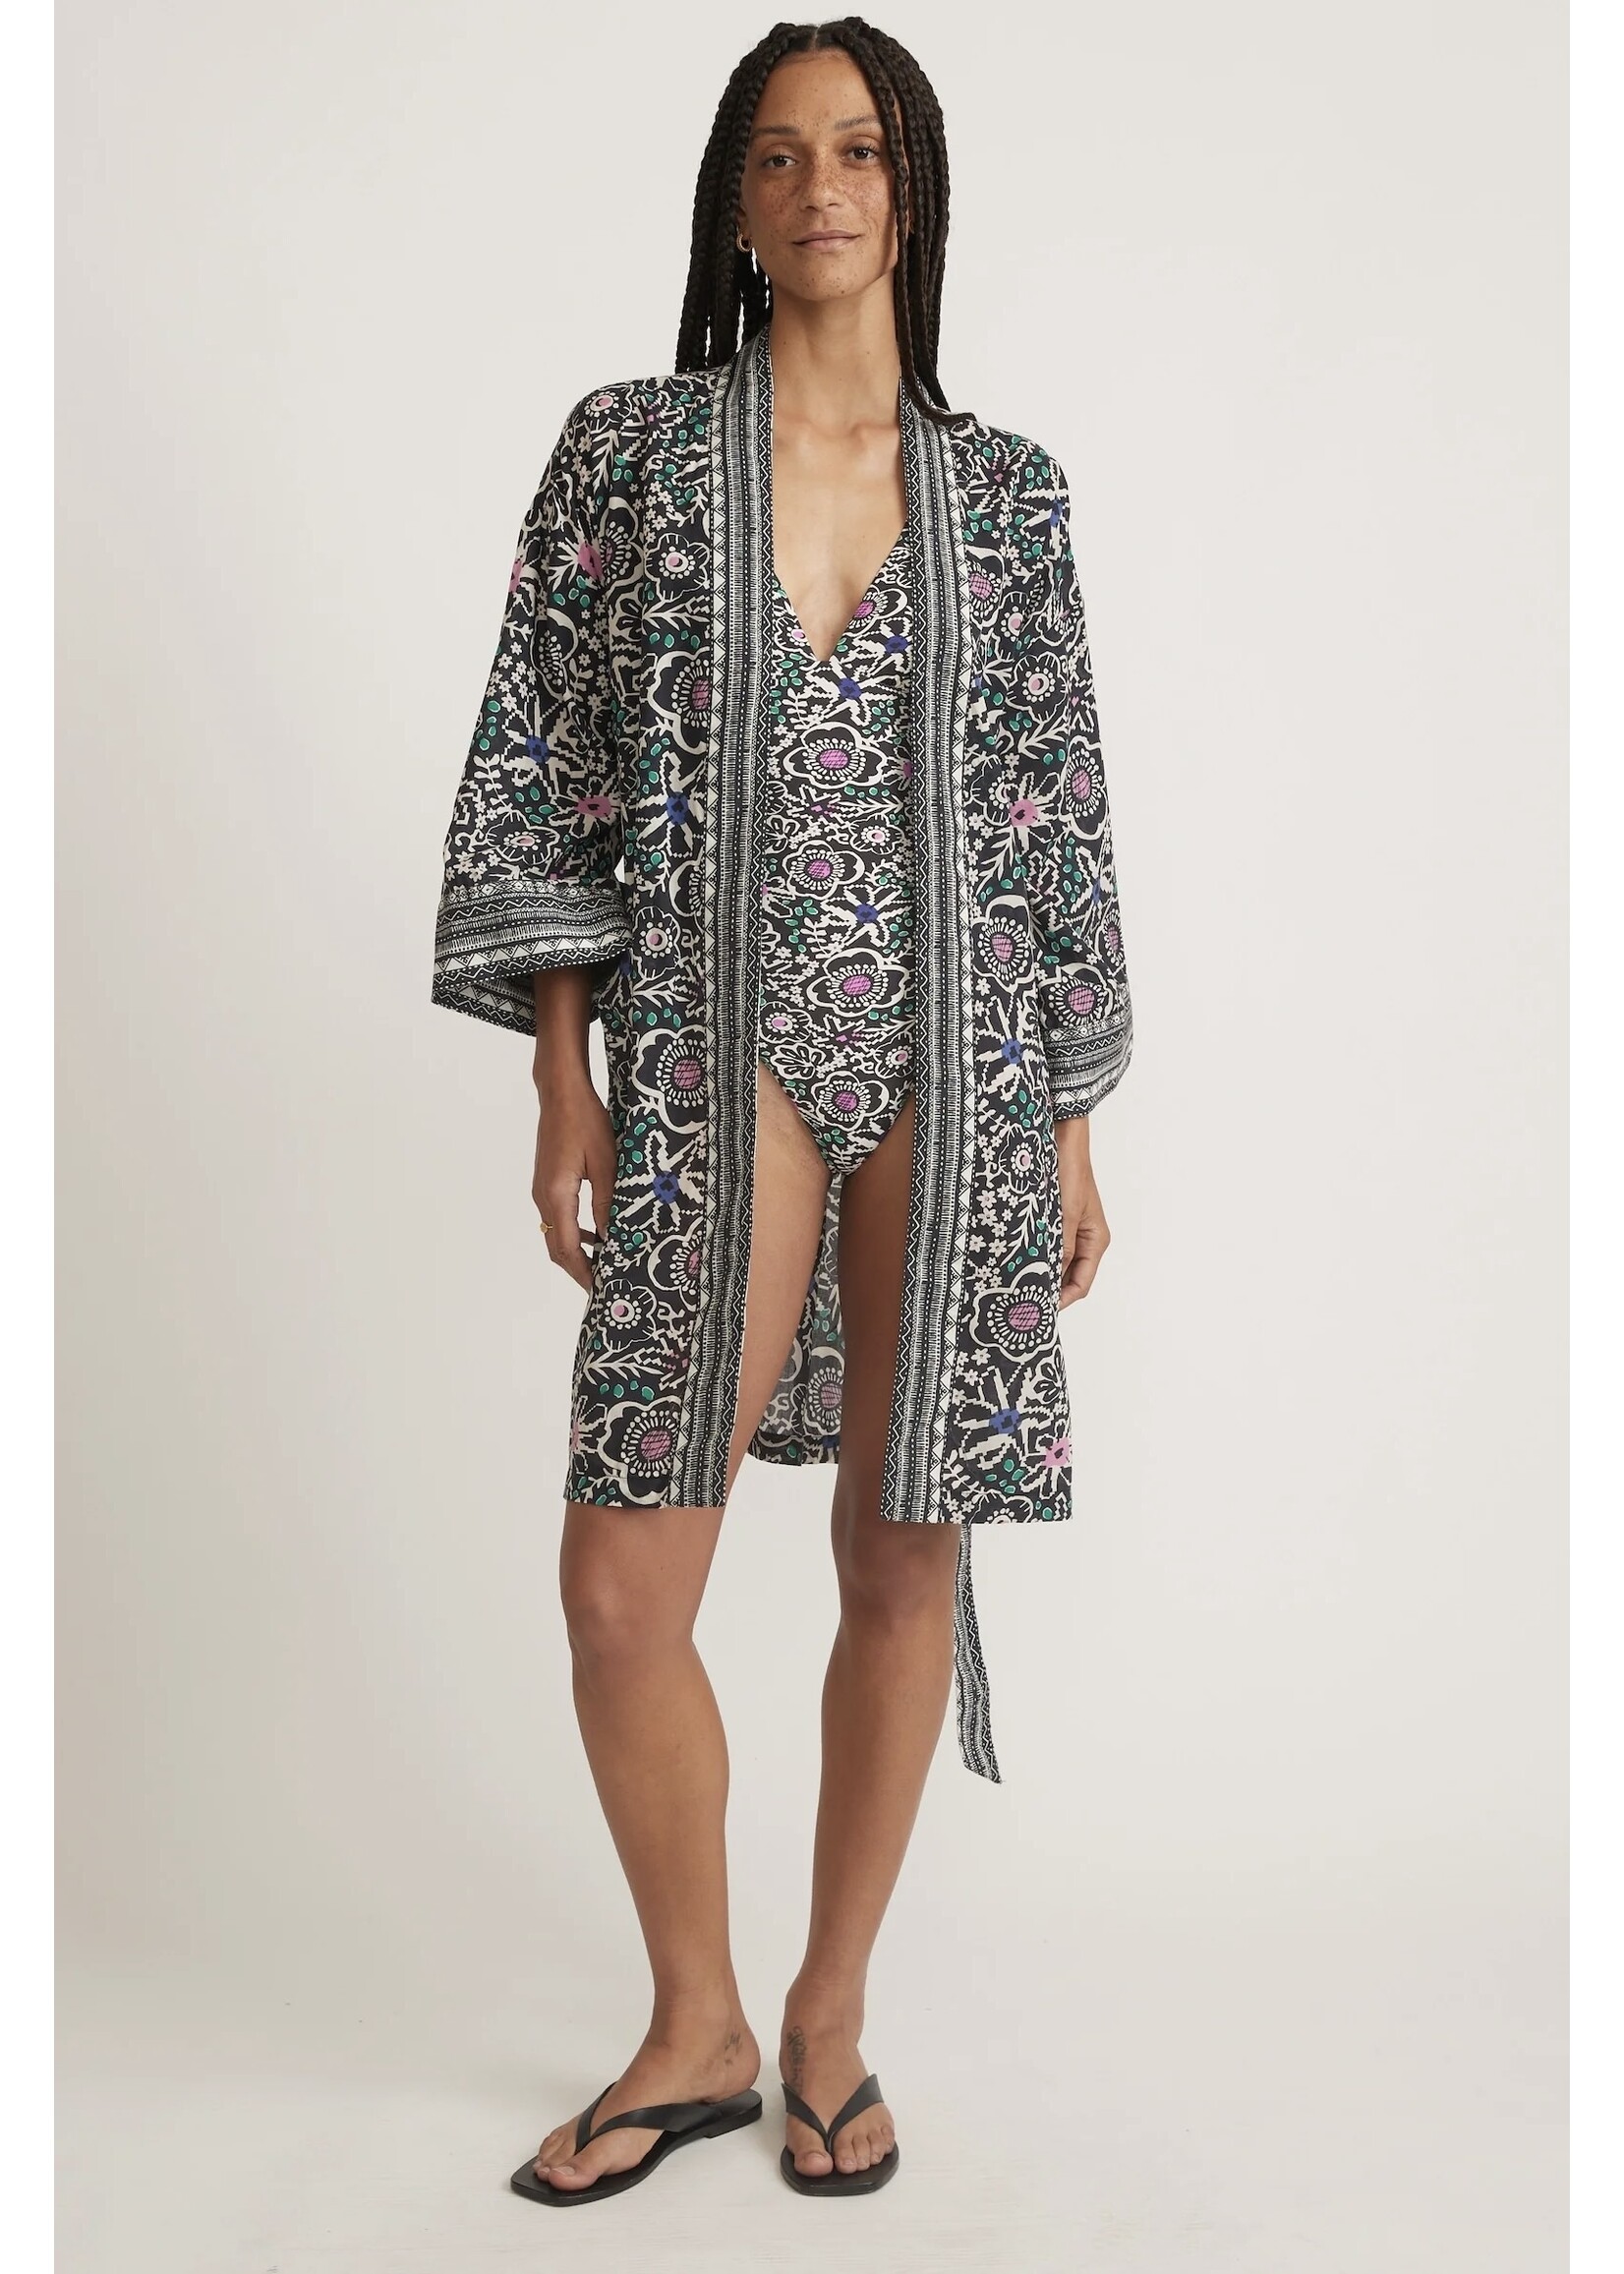 Marine Layer Sienne Cover Up